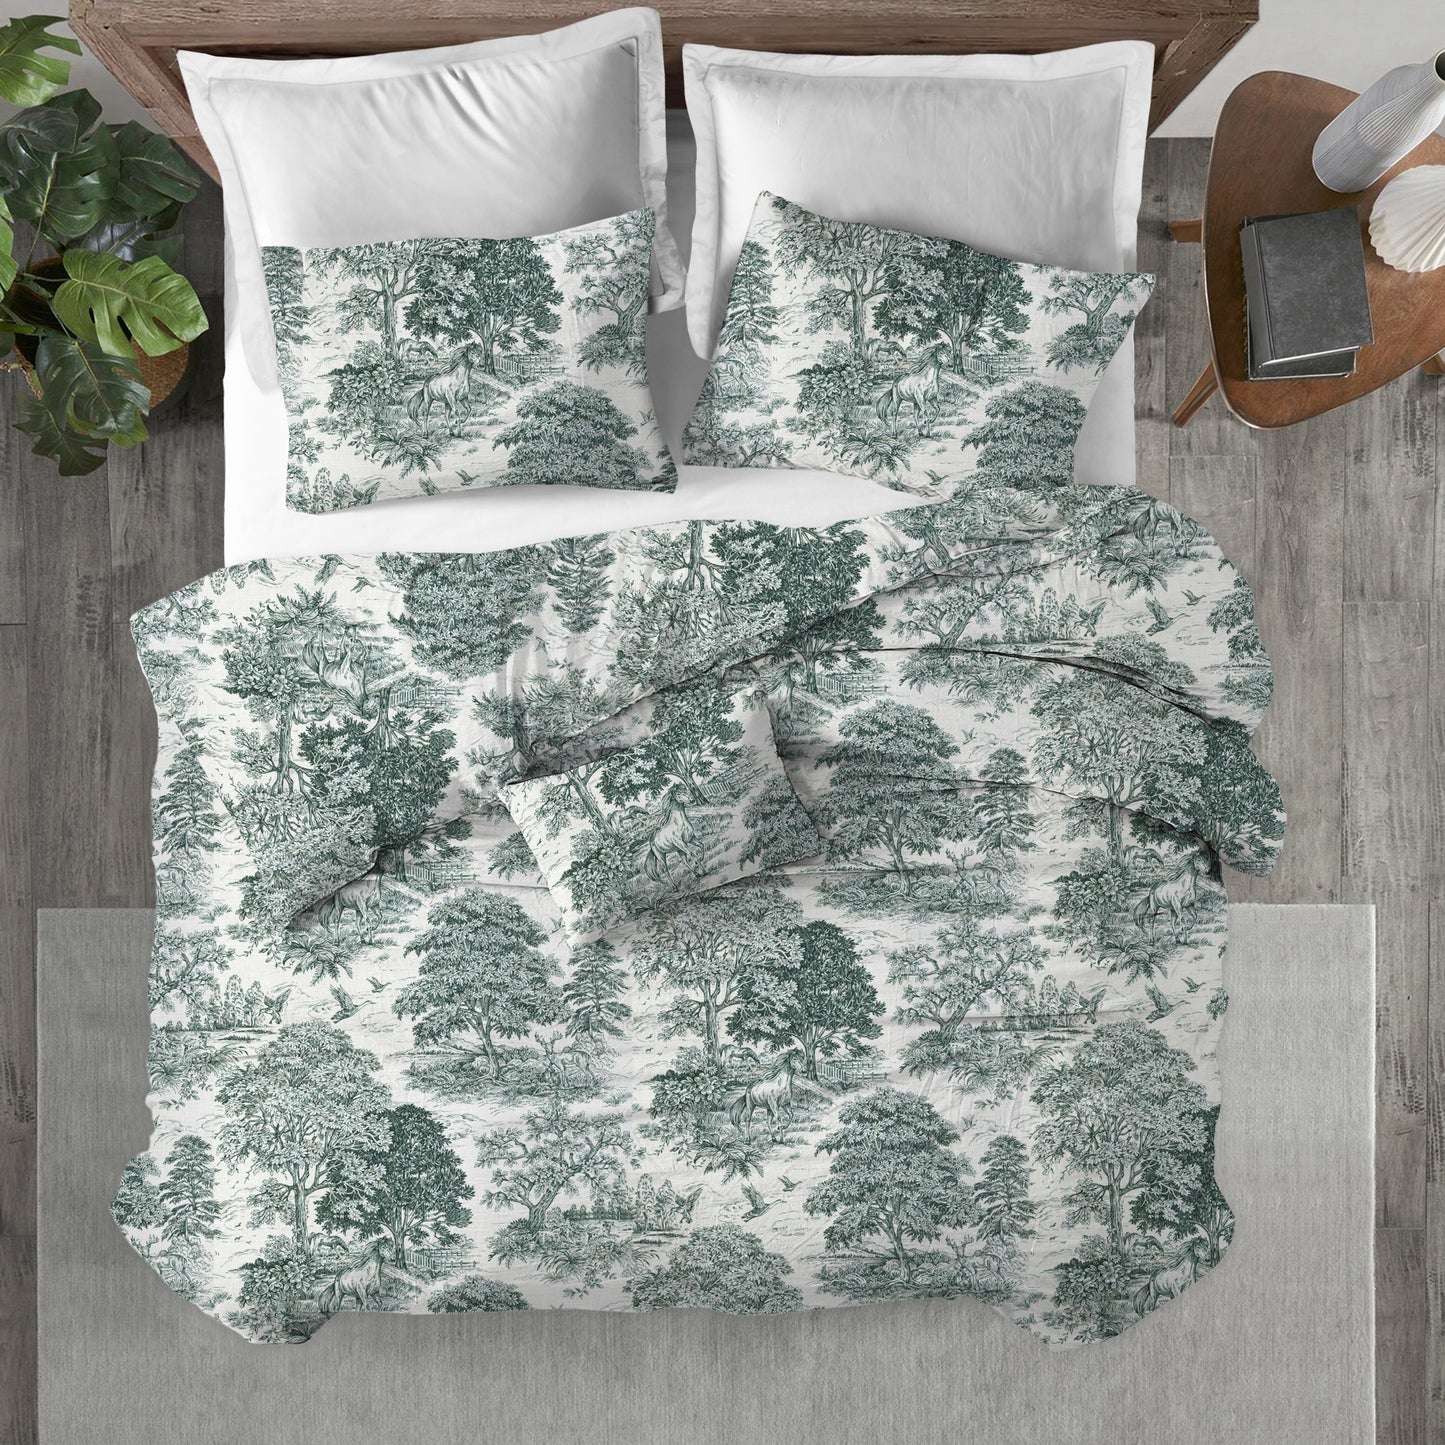 Duvet Cover in Yellowstone Classic Green Country Toile- Horses, Deer, Dogs- Large Scale